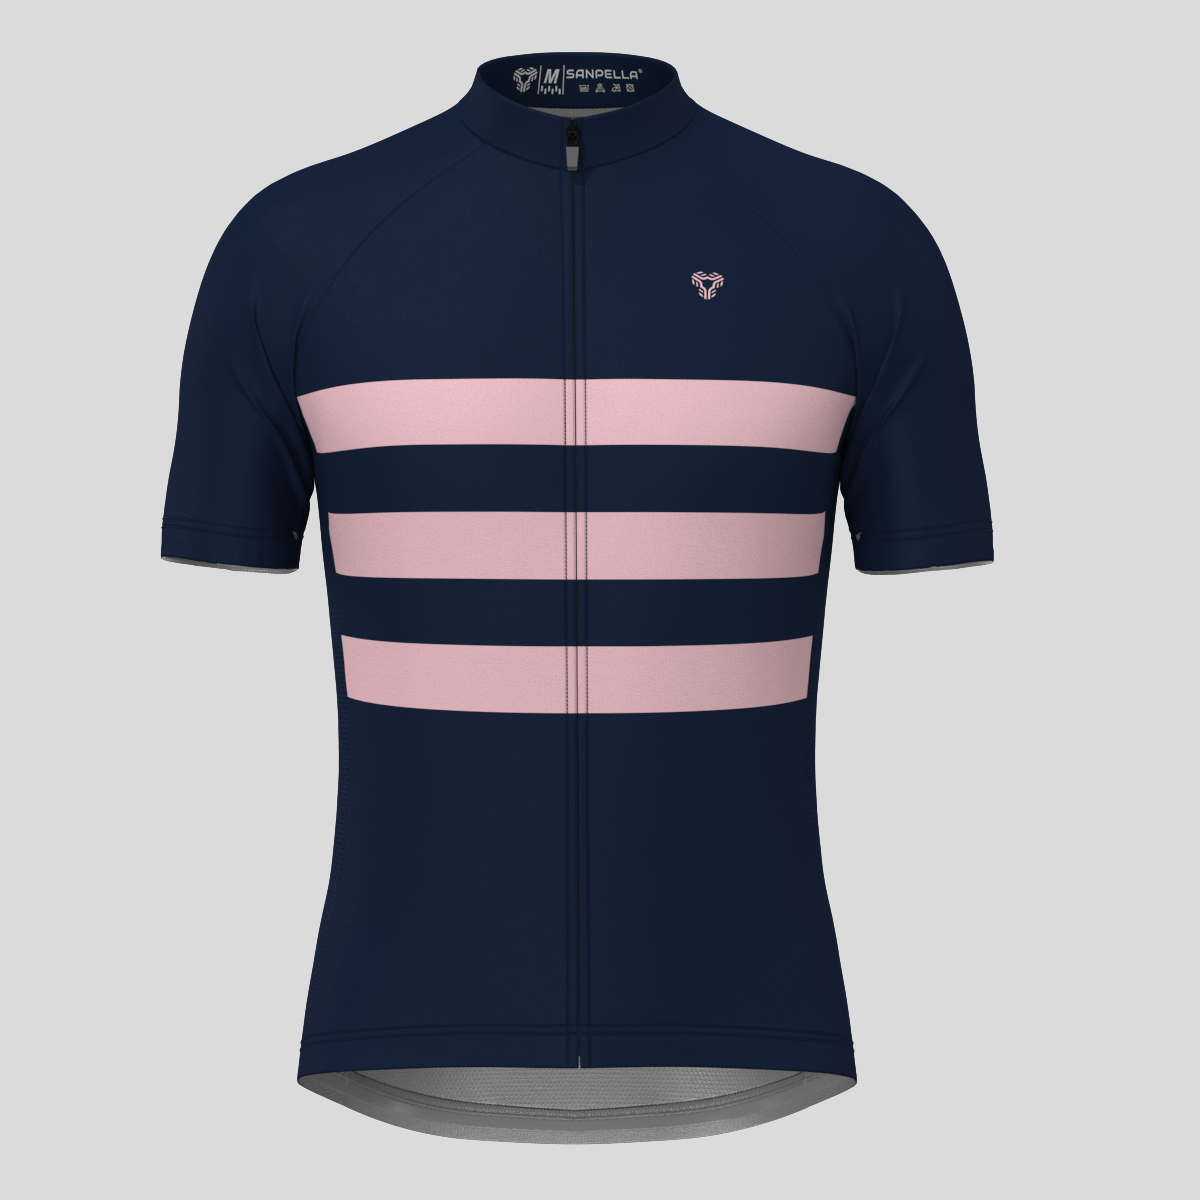 Men's Classic Stripes Cycling Jersey - Navy/Pink